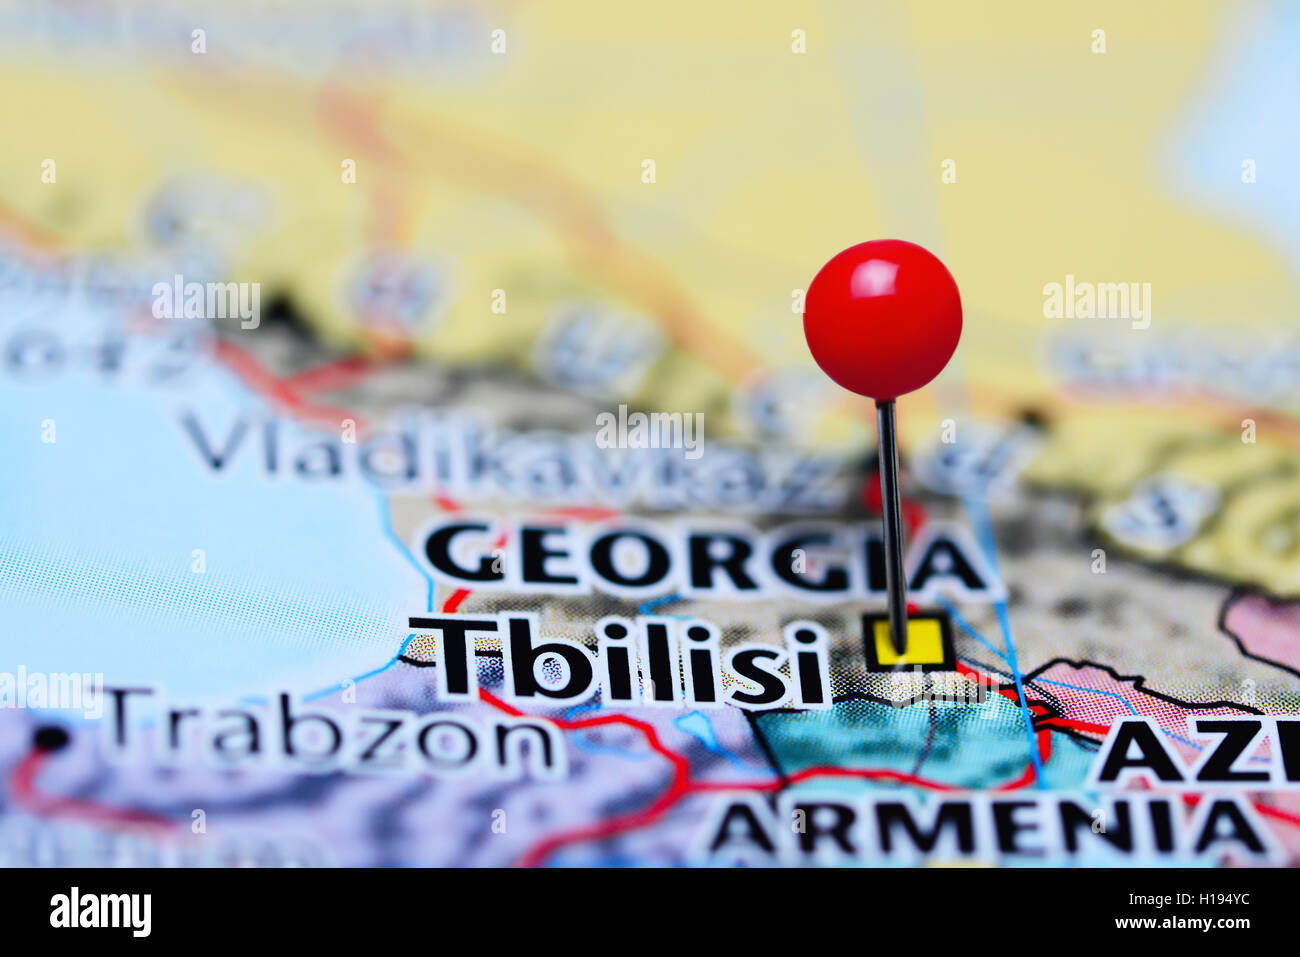 Tbilisi pinned on a map of Georgia Stock Photo